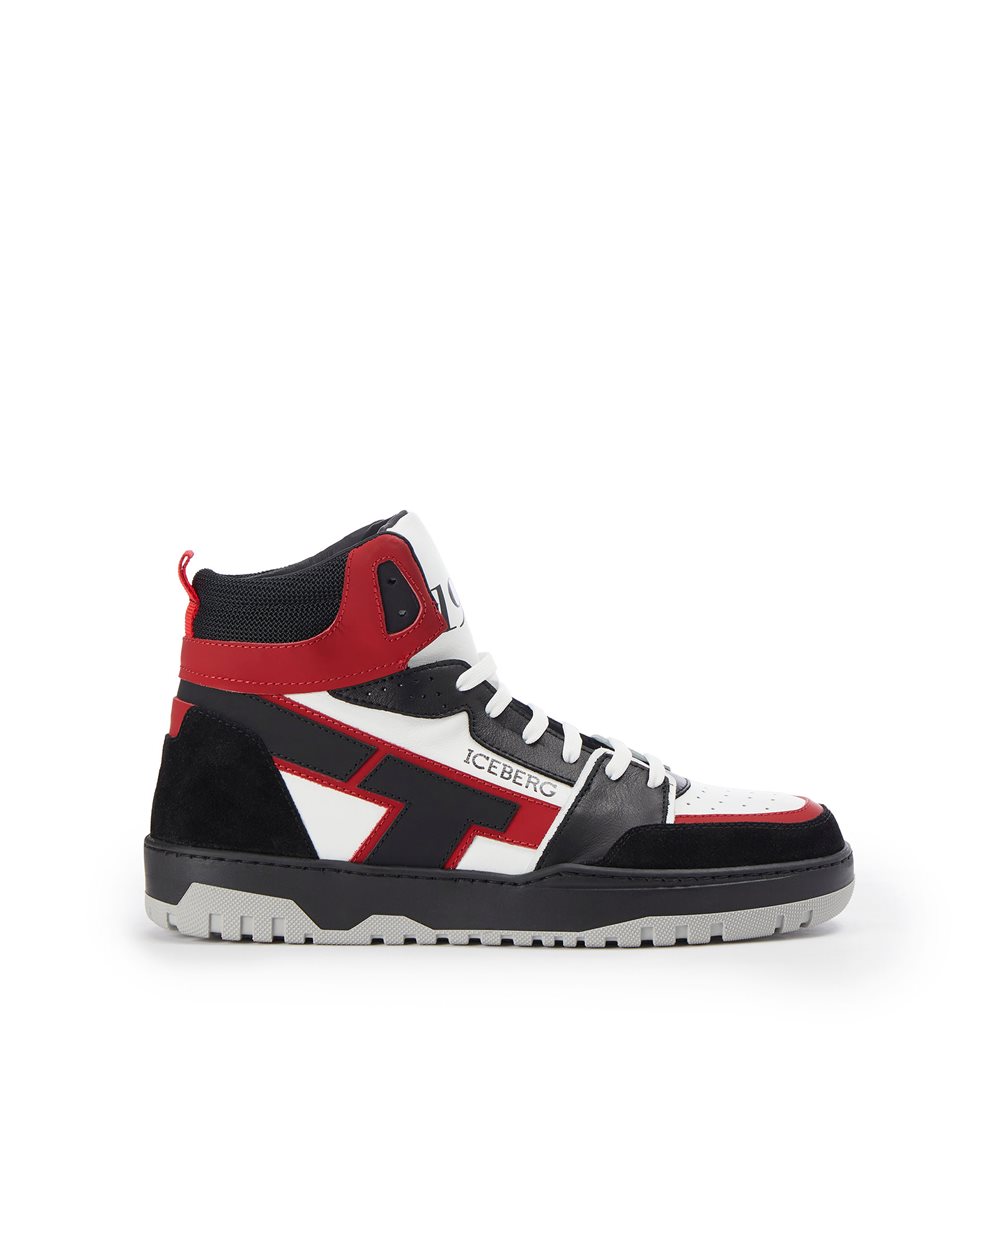 Okoro high-top sneakers - Shoes & sneakers | Iceberg - Official Website